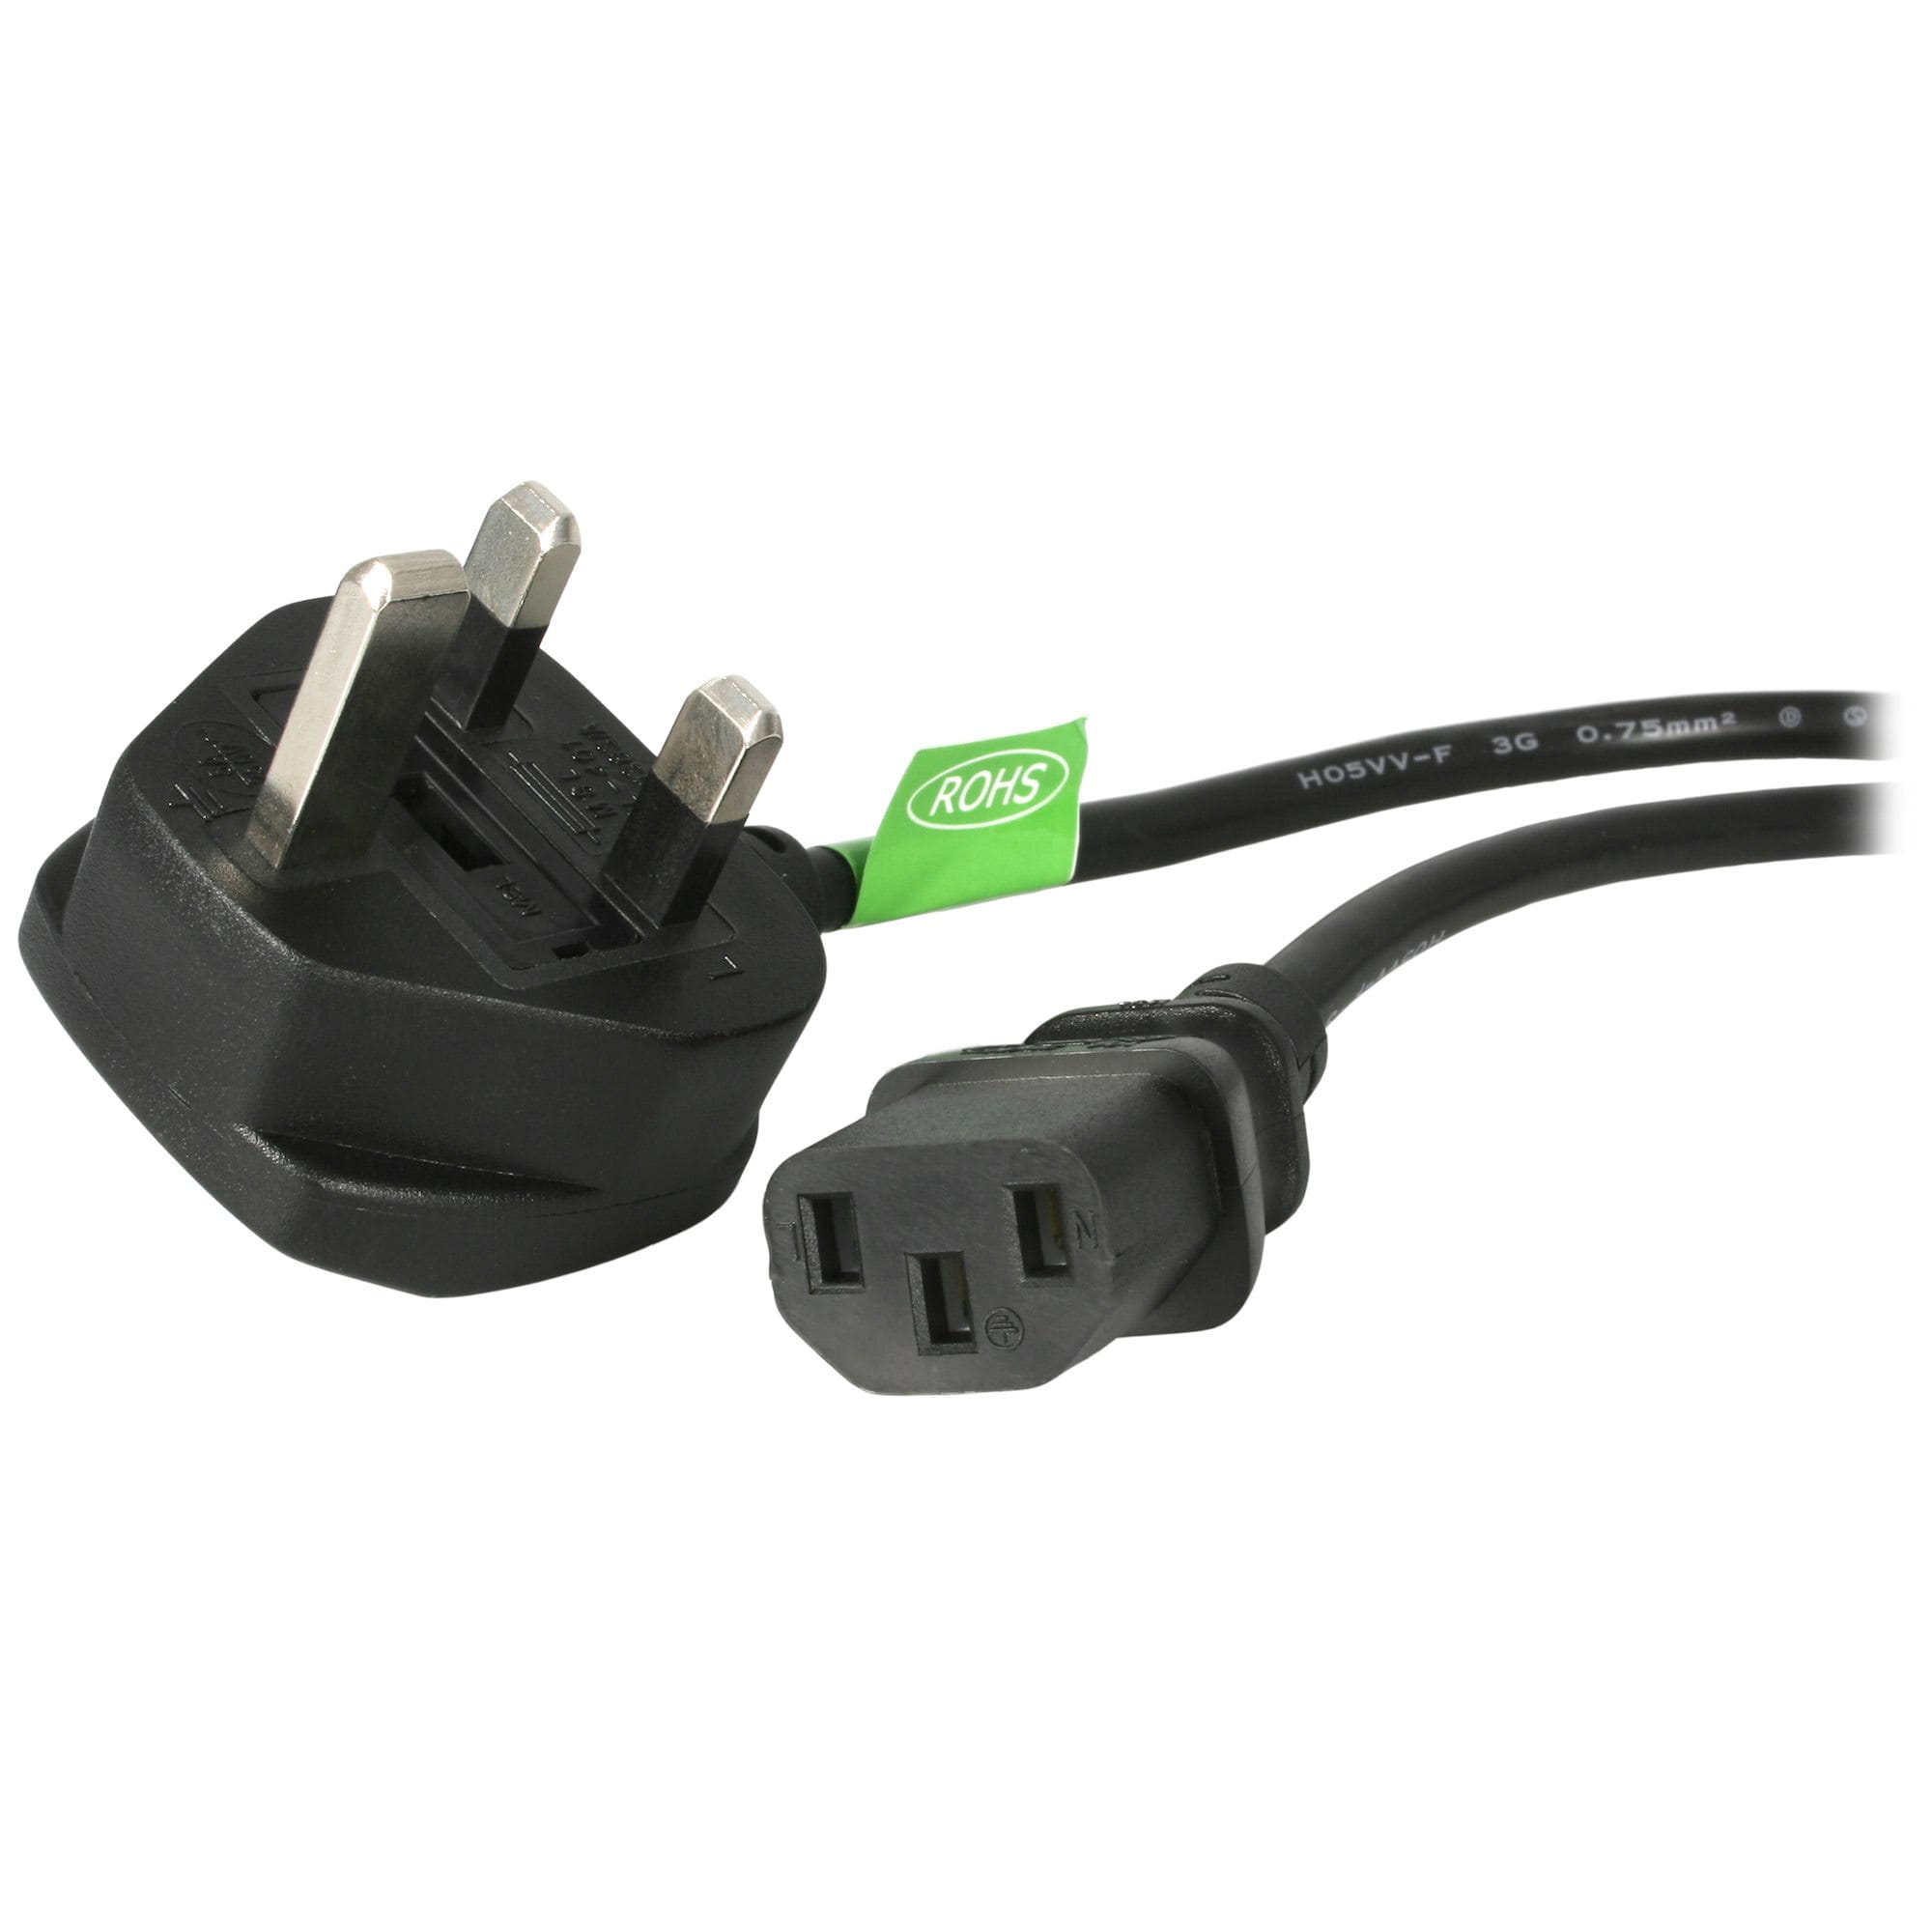 StarTech.com 3ft (1m) UK Computer Power Cable, BS 1363 to C13 Power Cord, 18AWG, 10A 250V, Black Replacement AC Power Cord, Monitor Power Cable, BS 1363 to IEC 60320 C13 Kettle Lead - PC Power Supply Cable (BS13U-1M-POWER-LEAD)